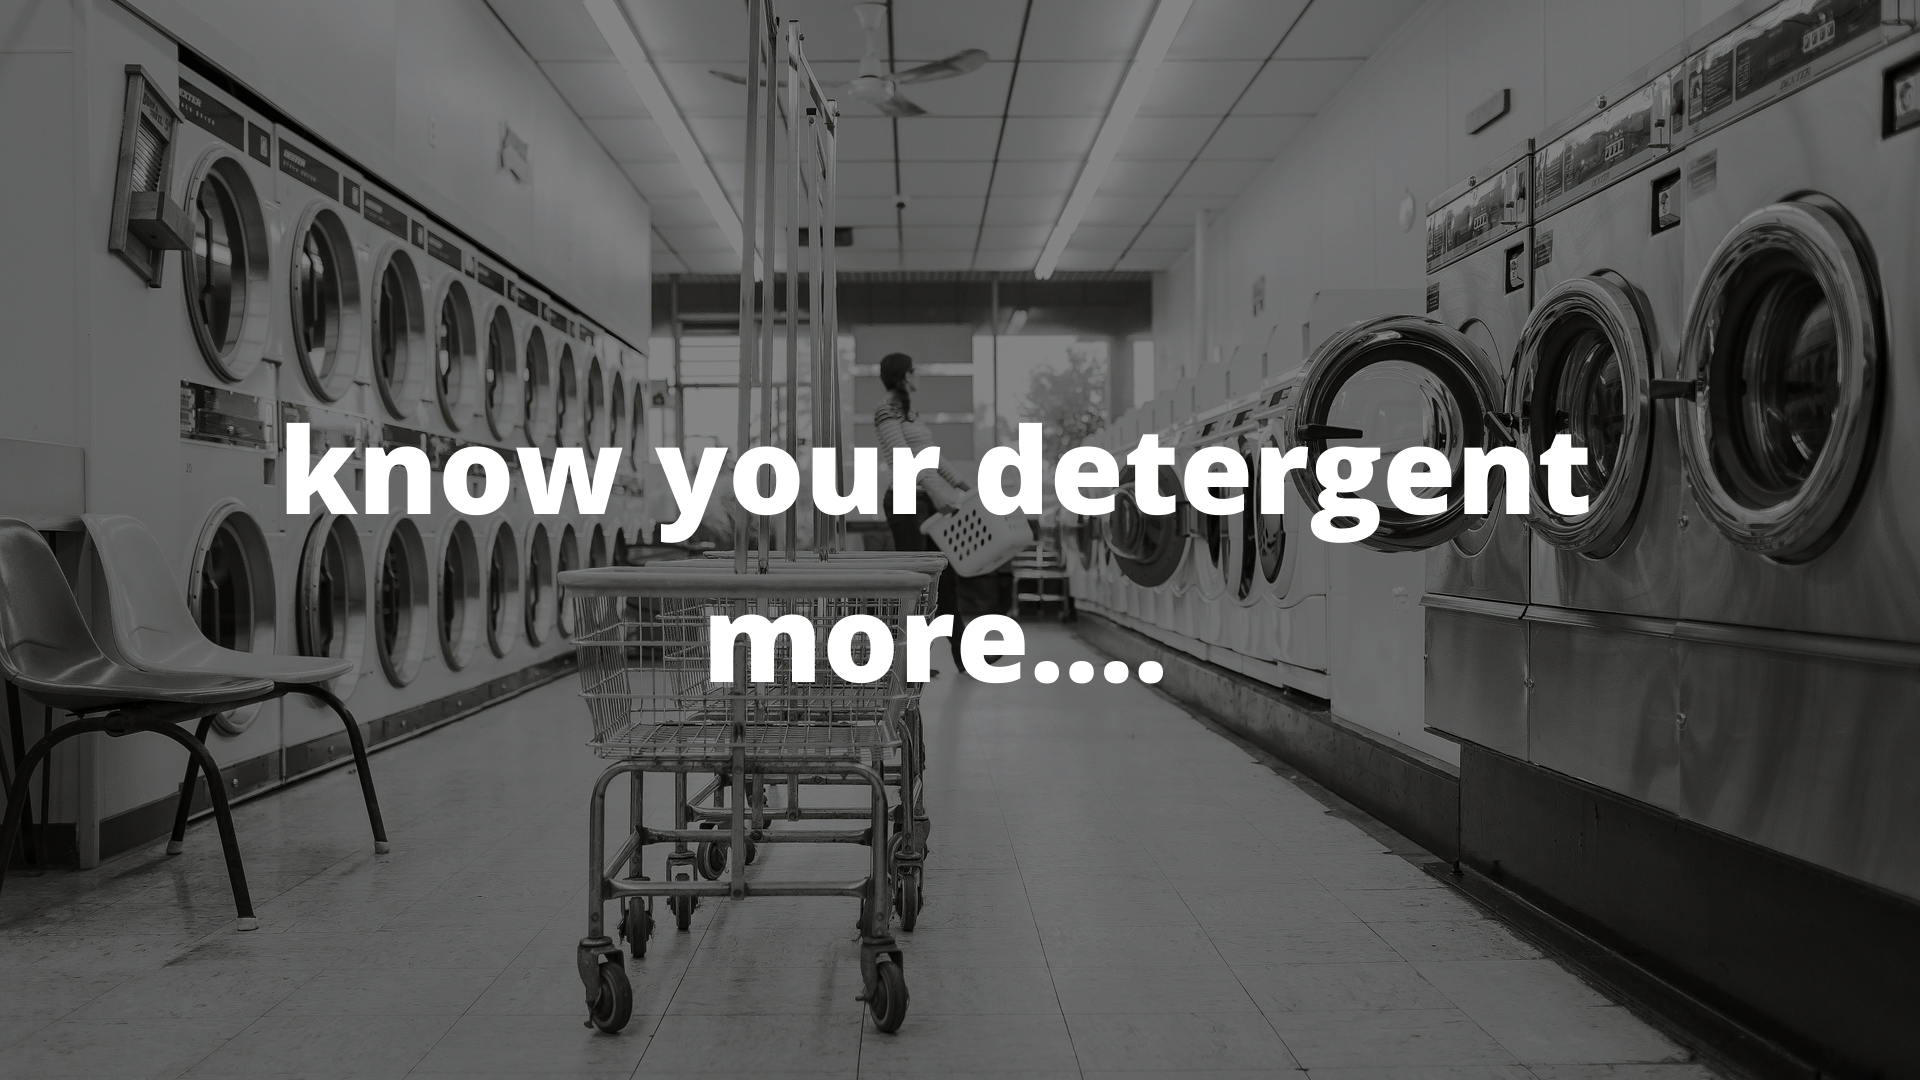 know your detergent more and the importance of eco-friendly detergents in the today's world